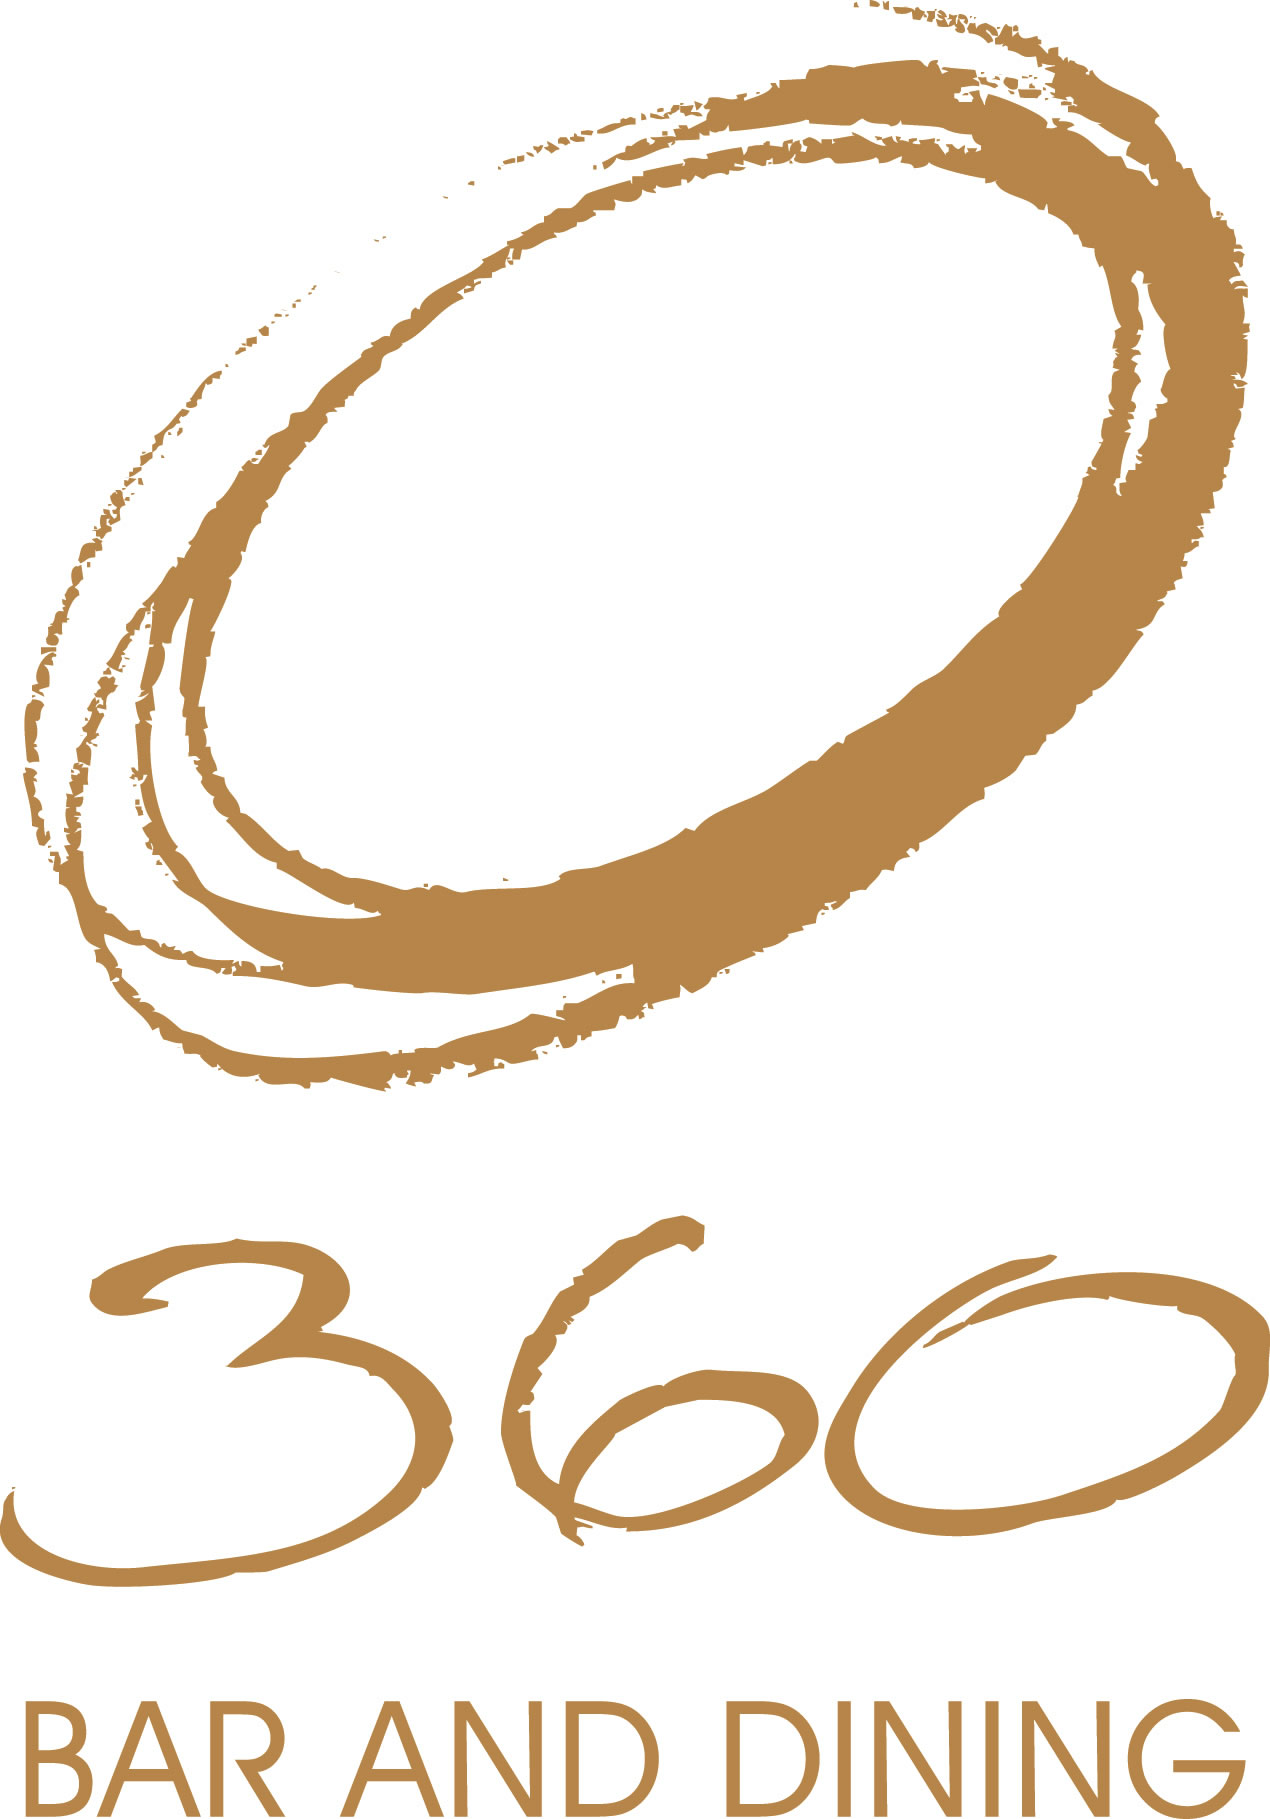 360 Bar And Dining - Hotel Accommodation 0